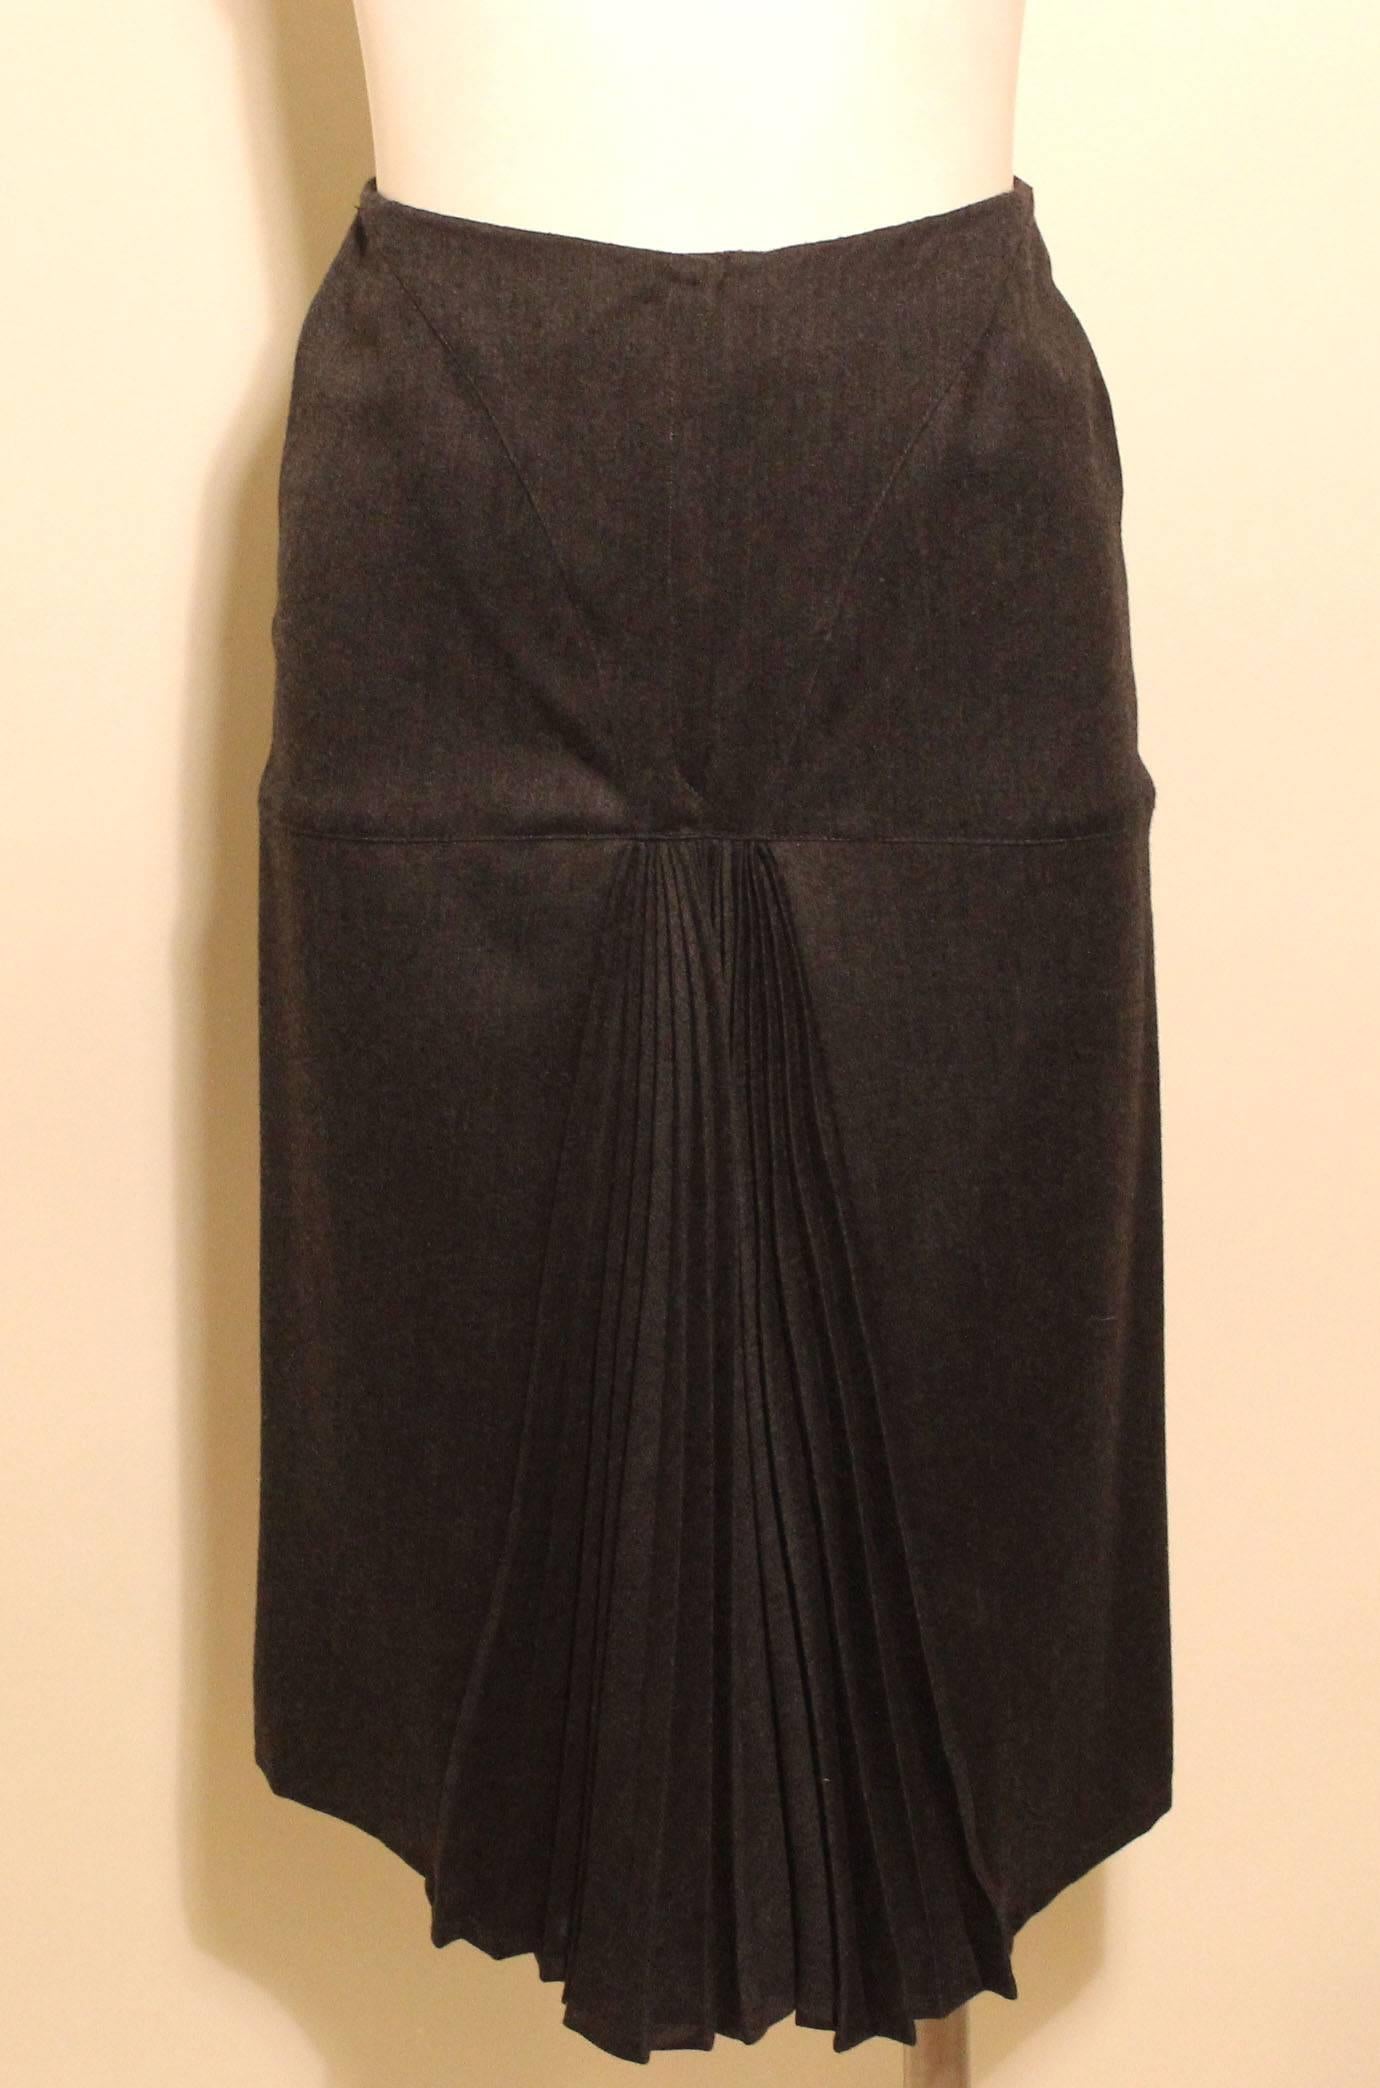 This grey fine wool Claude Montana skirt hugs the curves of the body with the addition of flirty front kick pleats.